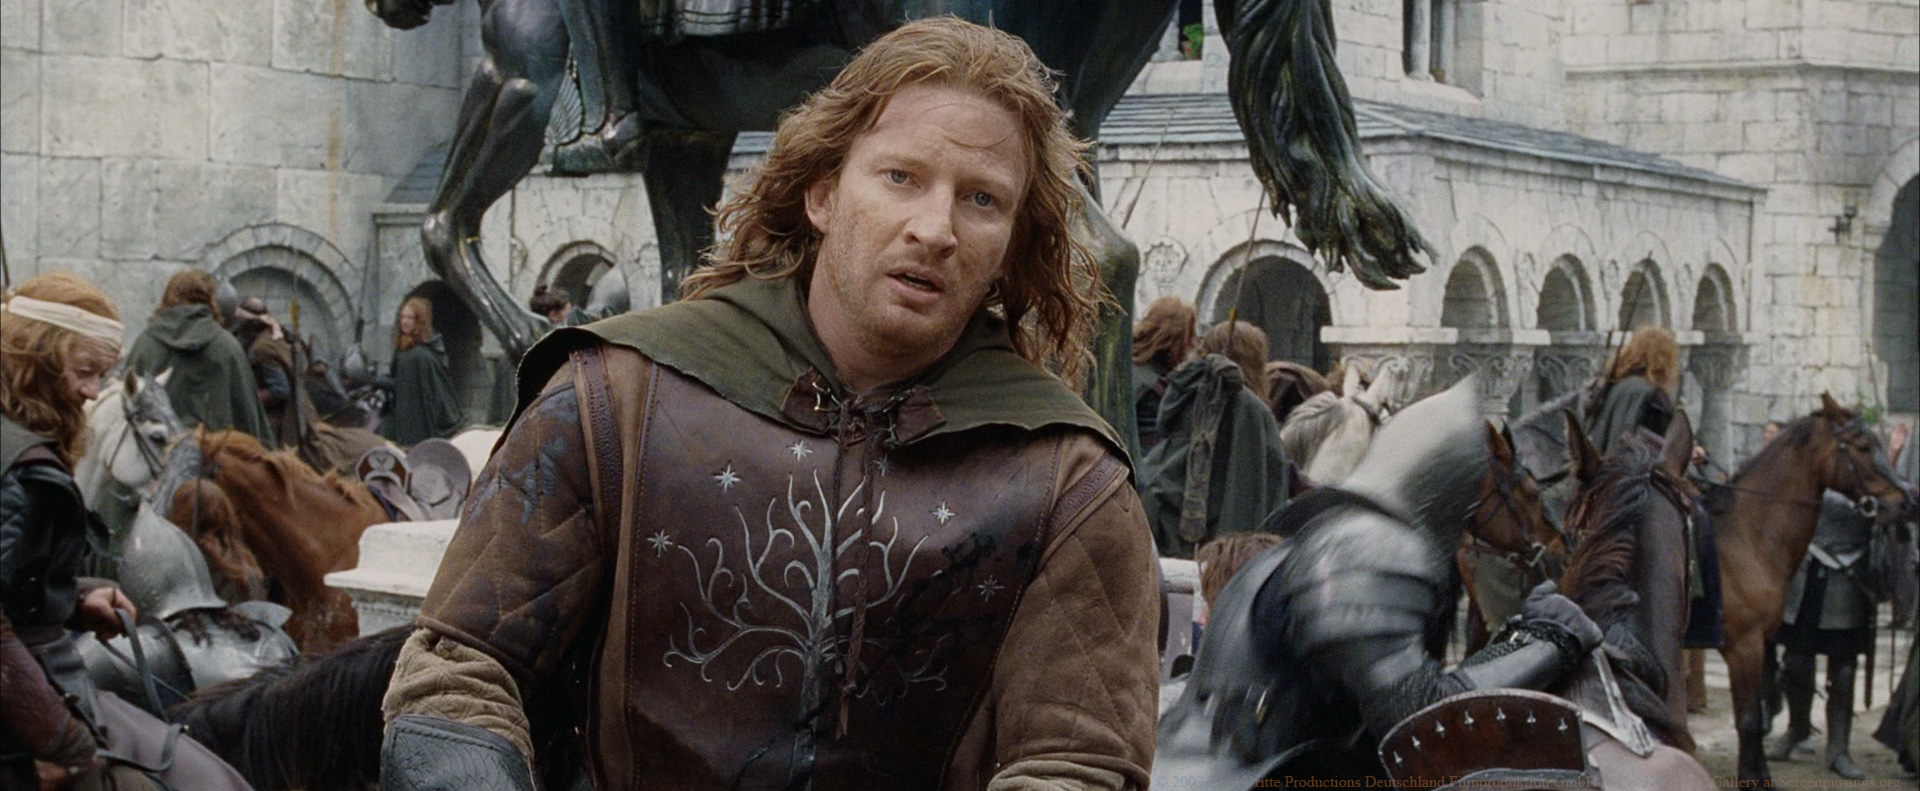 Sean Bean in The Lord of the Rings: The Return of the King